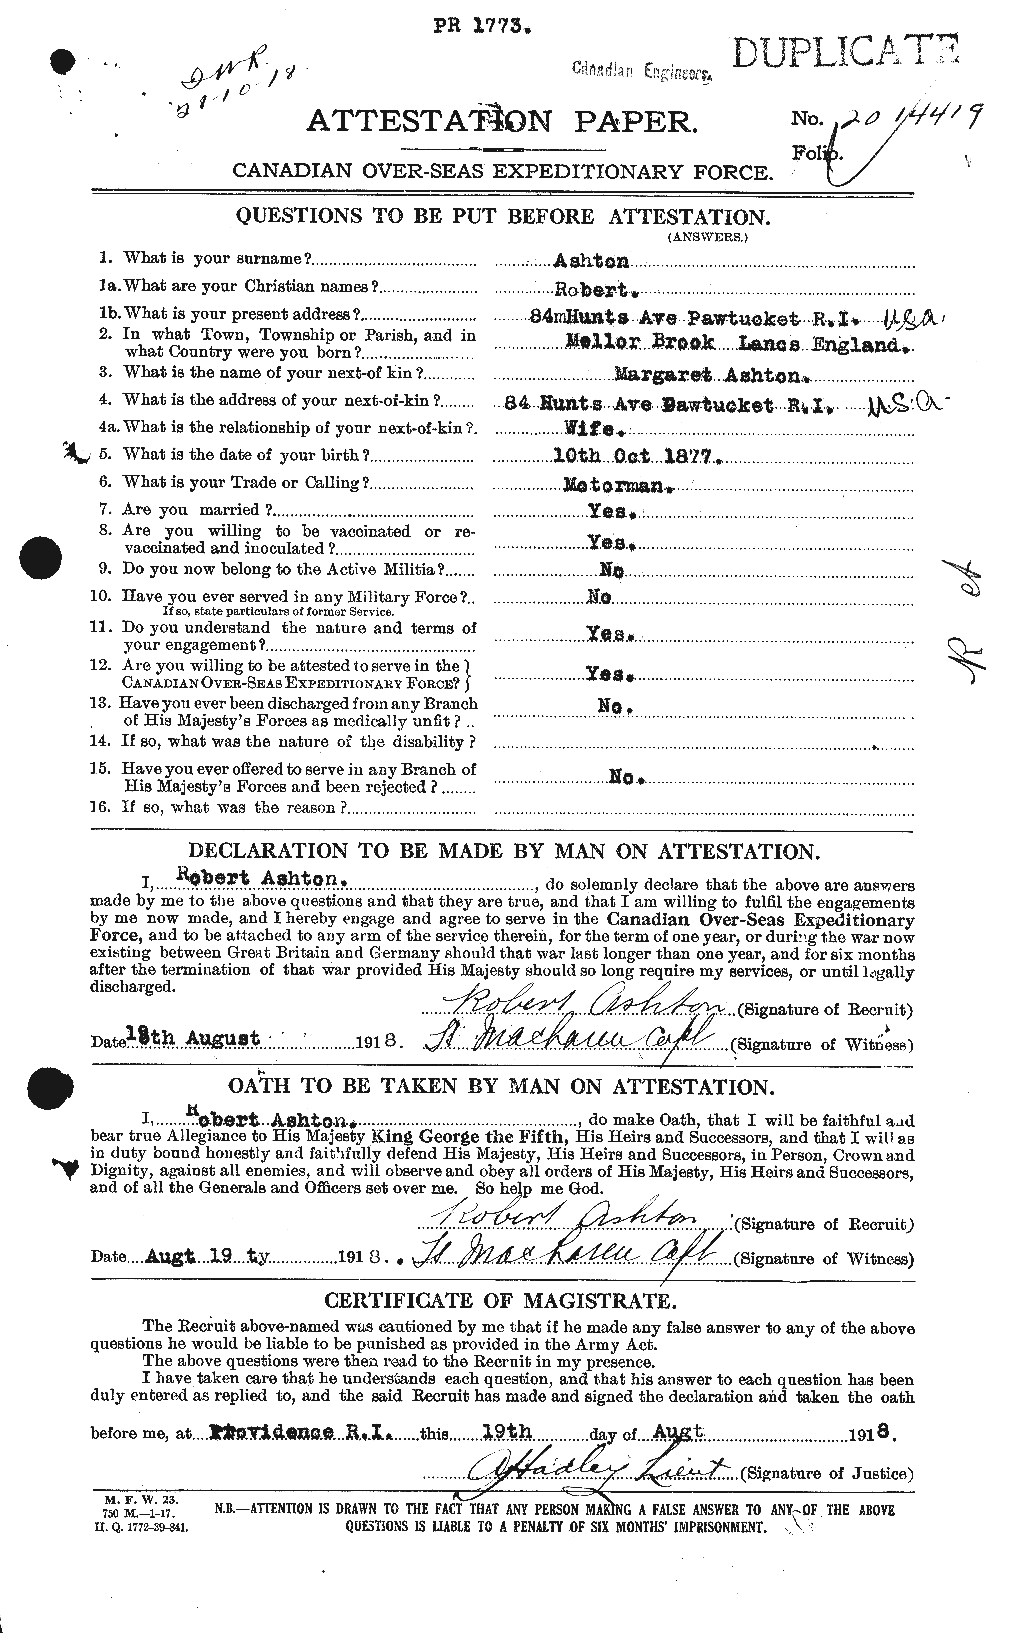 Personnel Records of the First World War - CEF 223812a